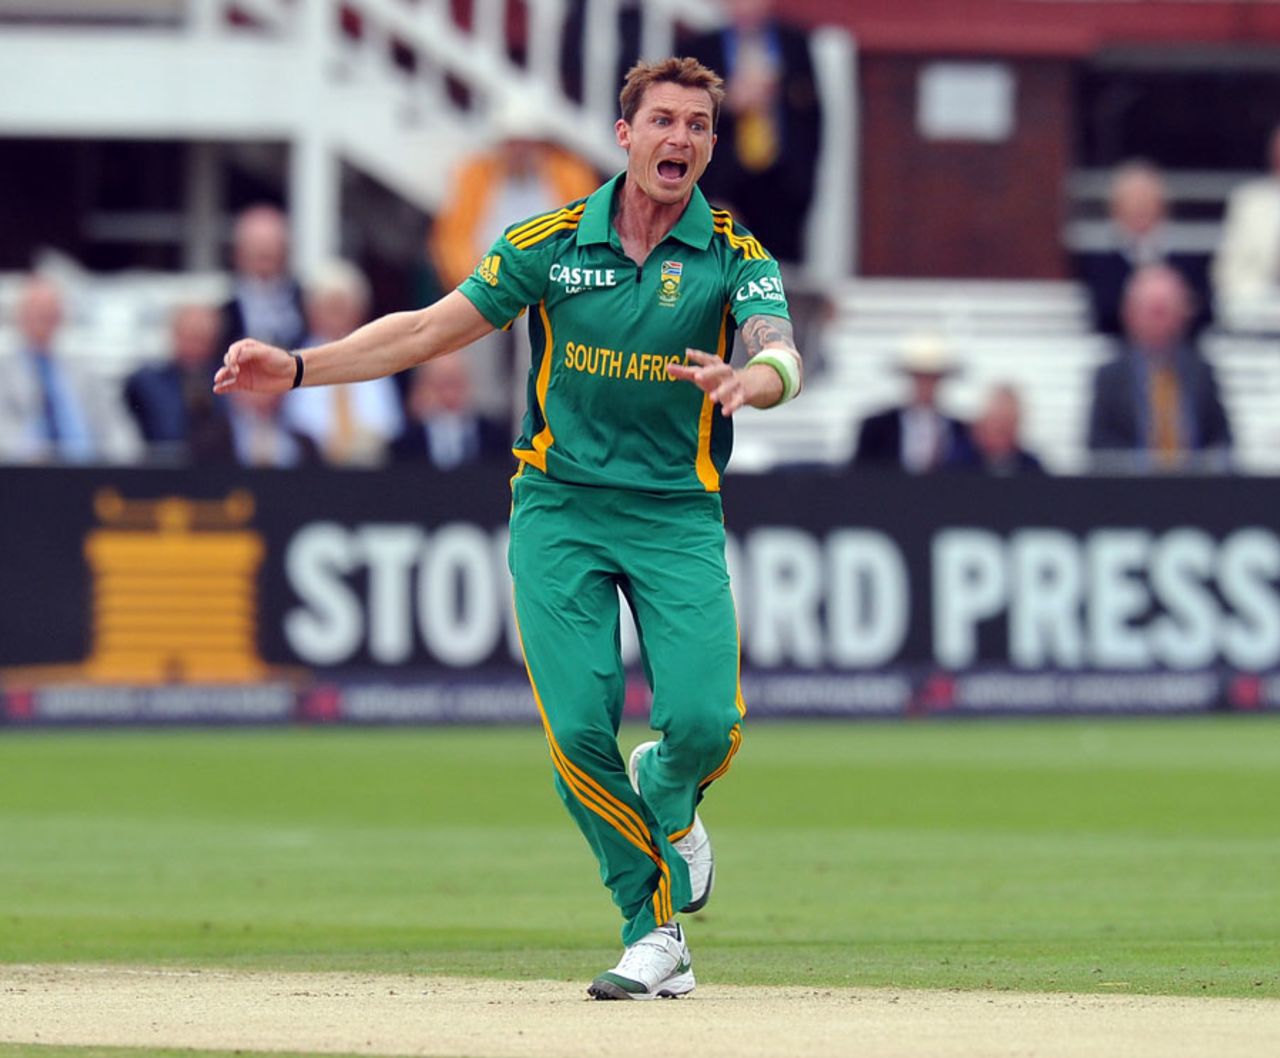 Dale Steyn bowled a probing opening spell, England v South Africa, 4th ODI, Lord's, September 2, 2012